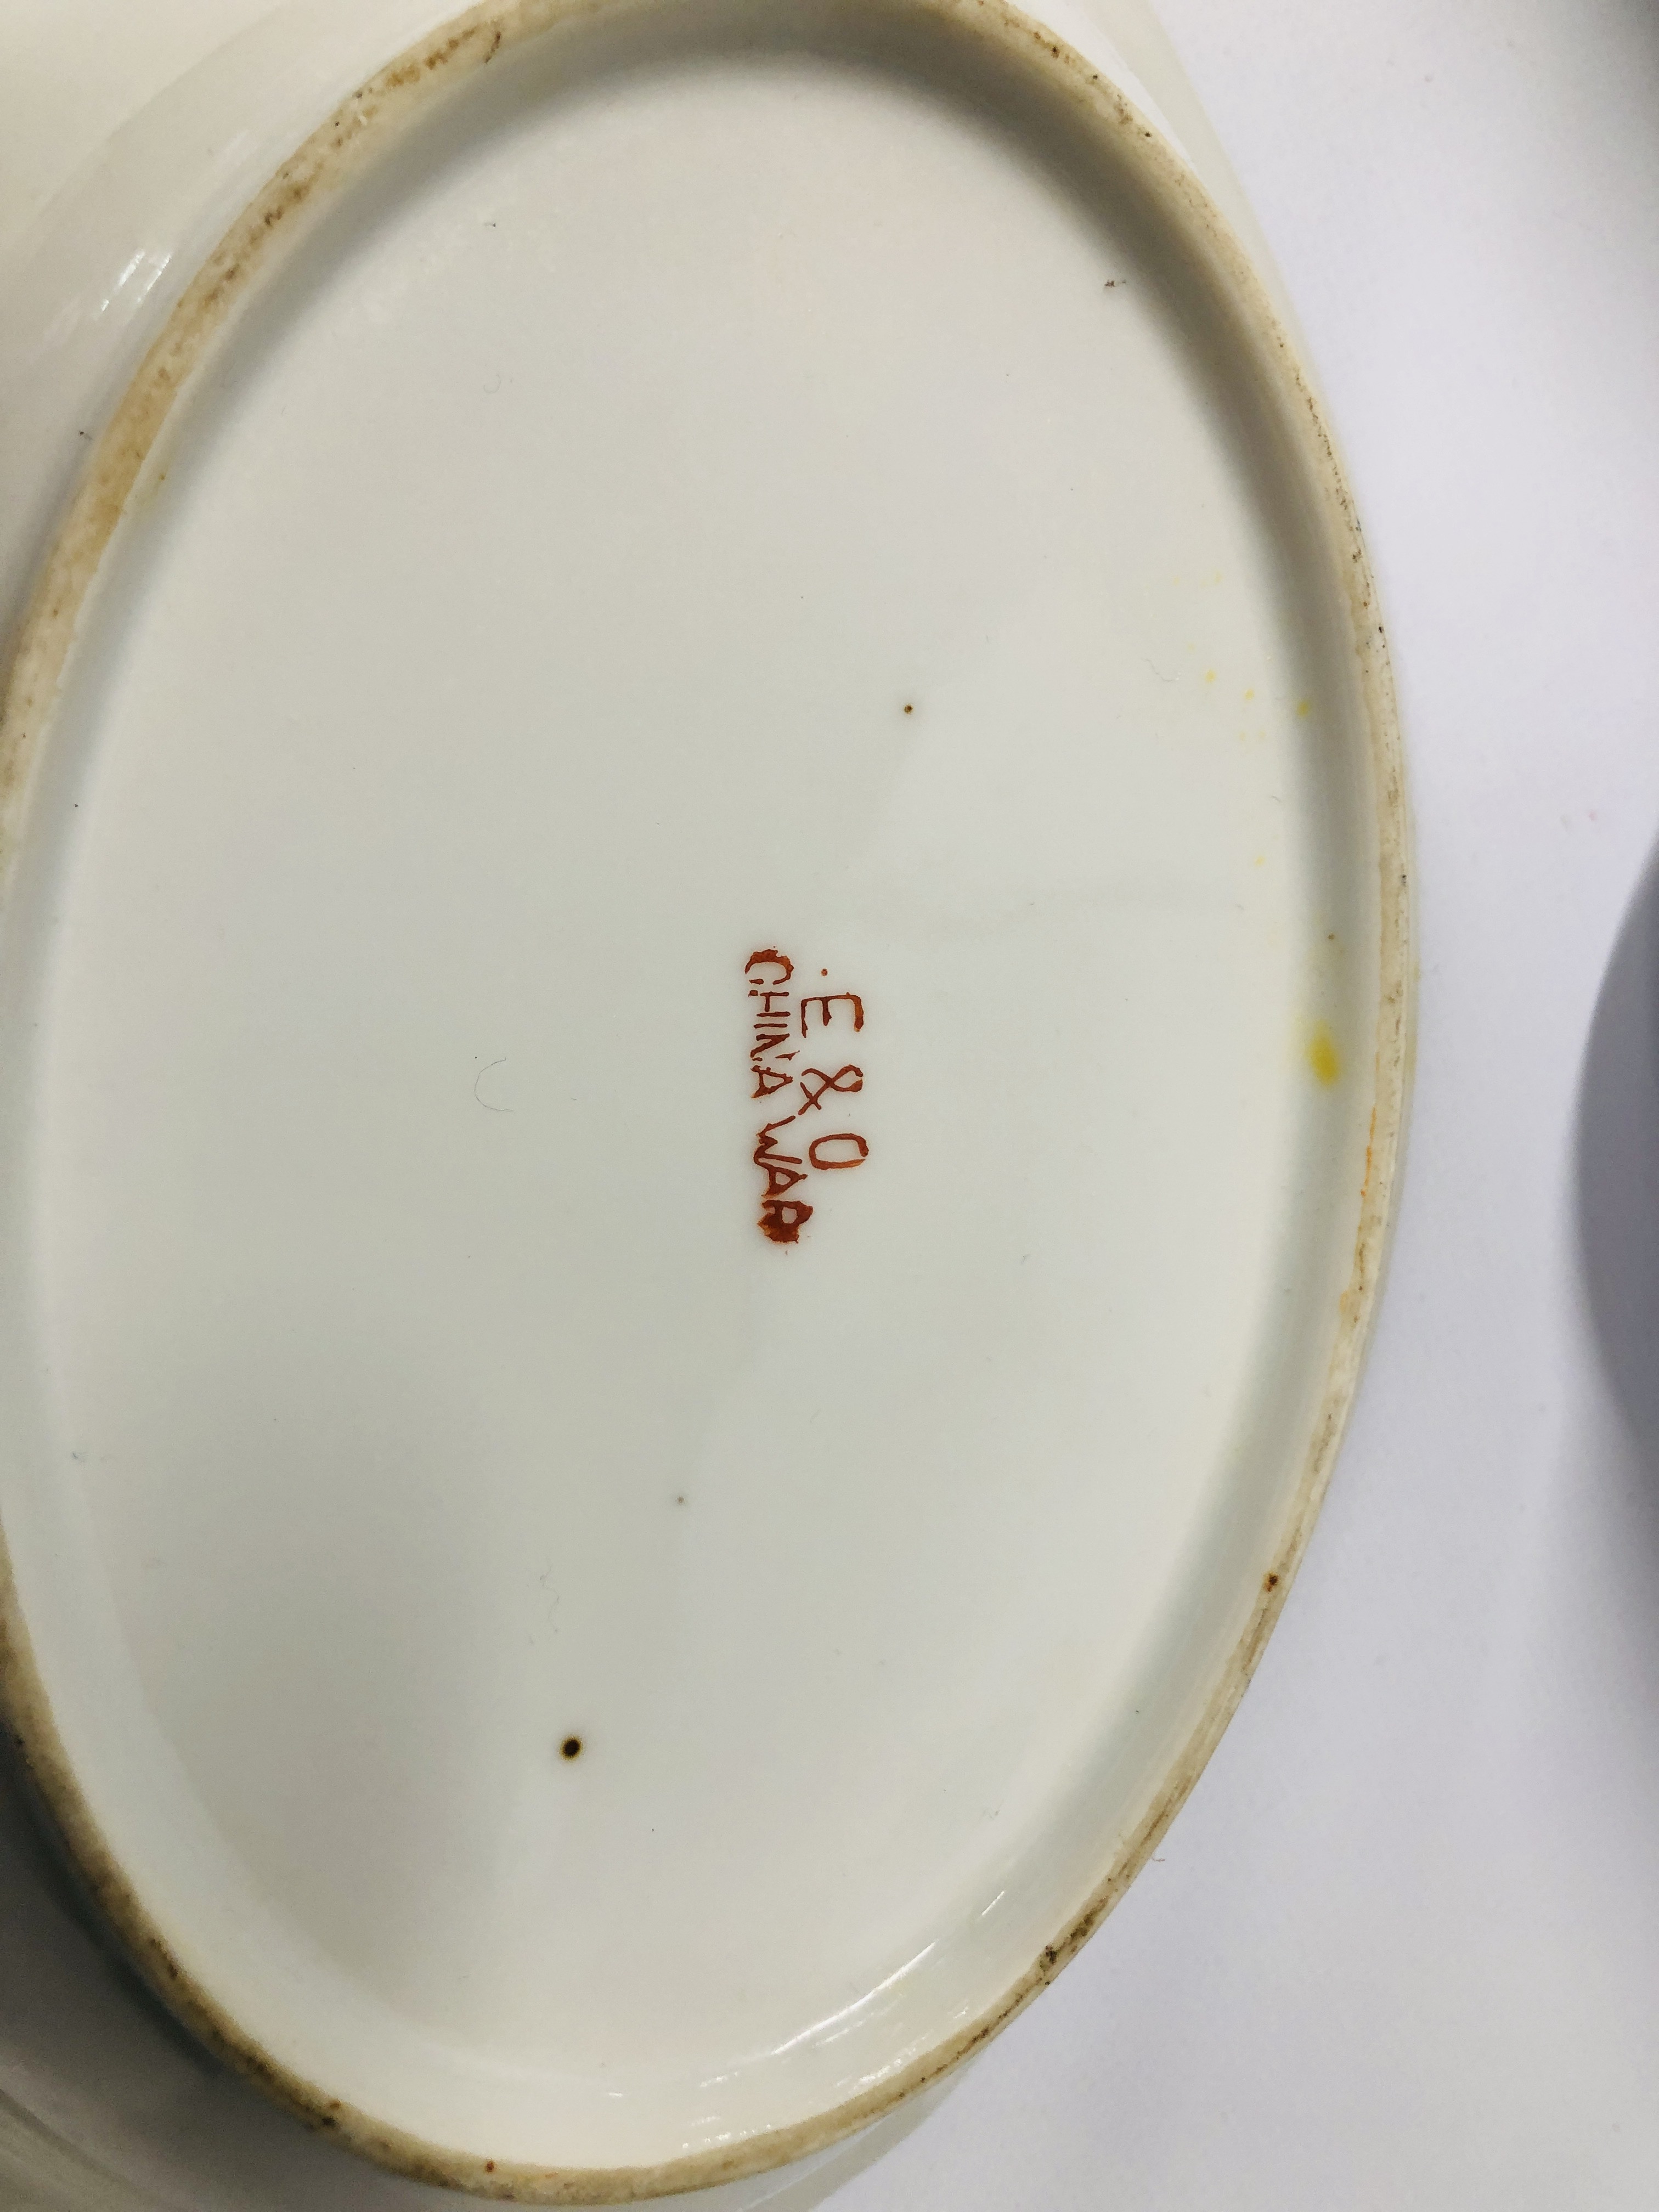 46 PIECES OF E & O CHINA WARE COMPRISING OF PLATES, BOWLS, CUPS AND SAUCERS, SERVING PLATE, - Bild 14 aus 18